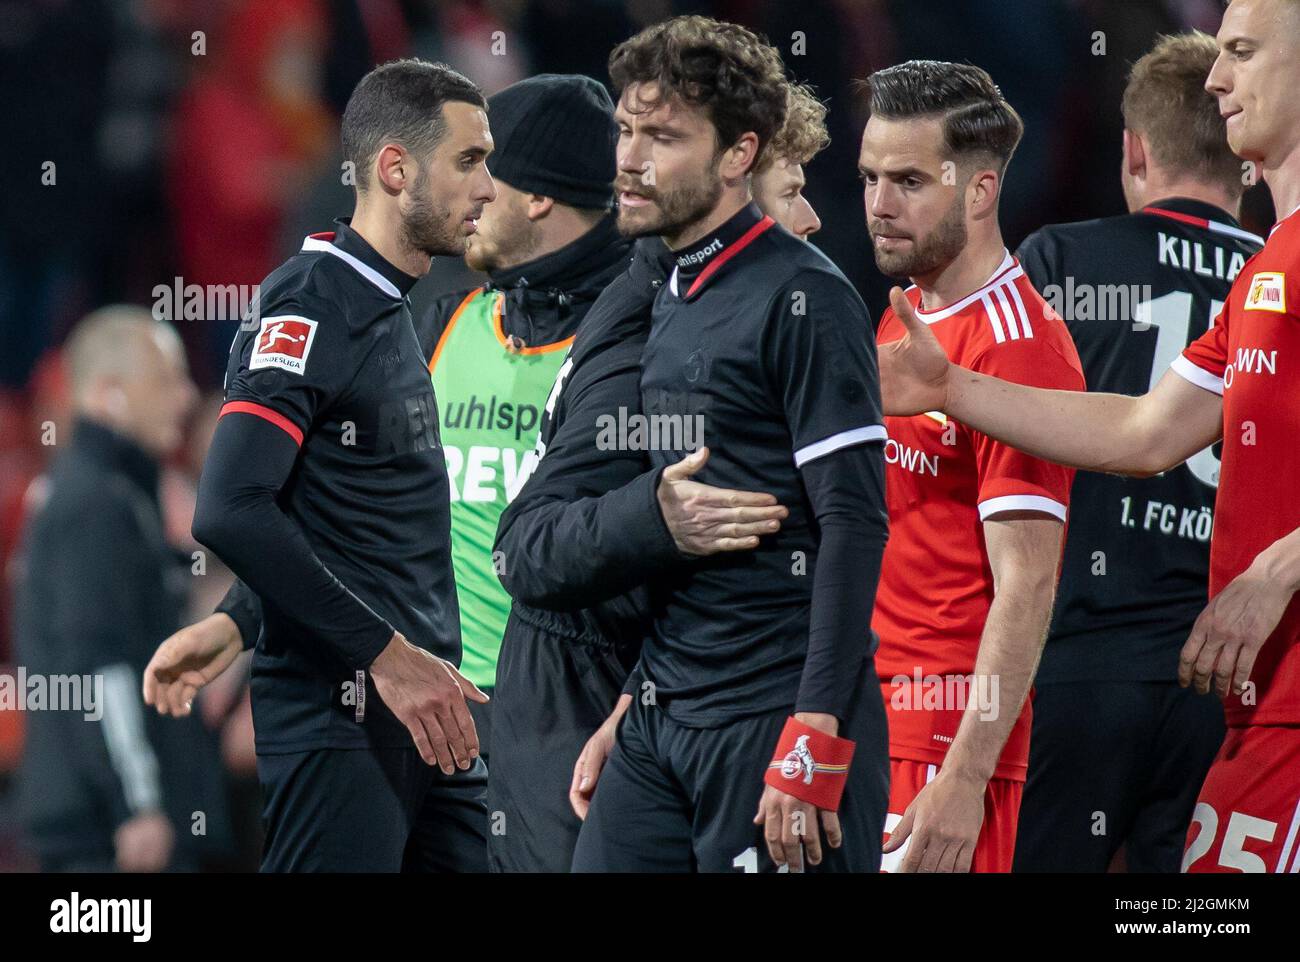 01 April 2022, Berlin: Soccer: Bundesliga, 1. FC Union Berlin - 1. FC Köln, Matchday 28, An der Alten Försterei. Florian Kainz (2nd from left) of Cologne and teammates stand disappointed on the pitch. Berlin's Niko Gießelmann and Timo Baumgartl (r) offer consolation. Photo: Andreas Gora/dpa - IMPORTANT NOTE: In accordance with the requirements of the DFL Deutsche Fußball Liga and the DFB Deutscher Fußball-Bund, it is prohibited to use or have used photographs taken in the stadium and/or of the match in the form of sequence pictures and/or video-like photo series. Stock Photo